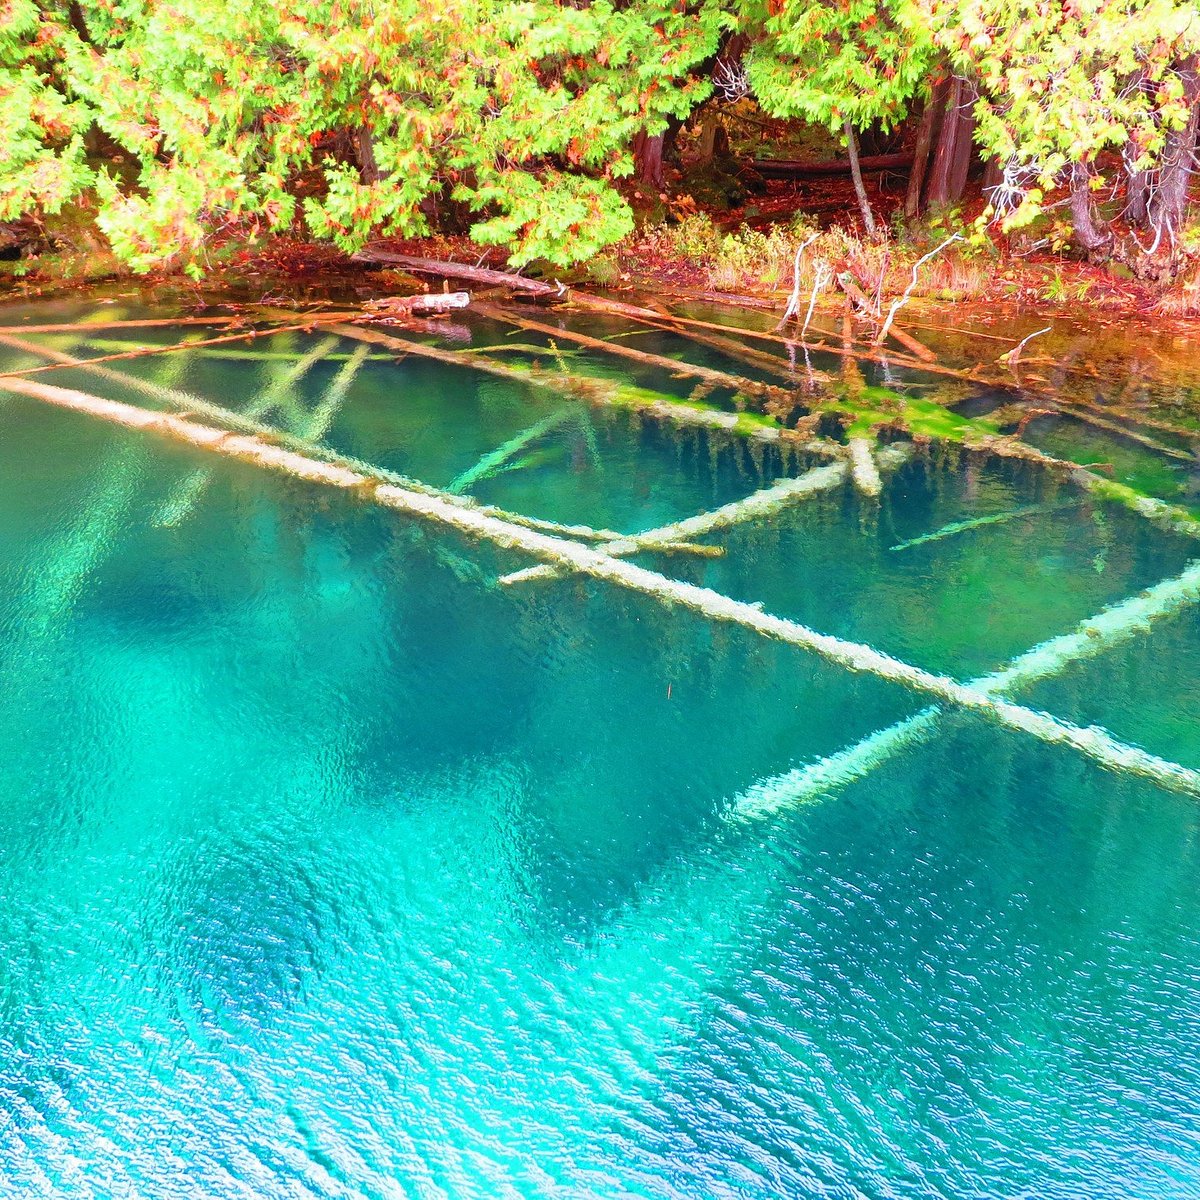 Kitch-Iti-Kipi (The Big Spring) - All You Need to Know BEFORE You